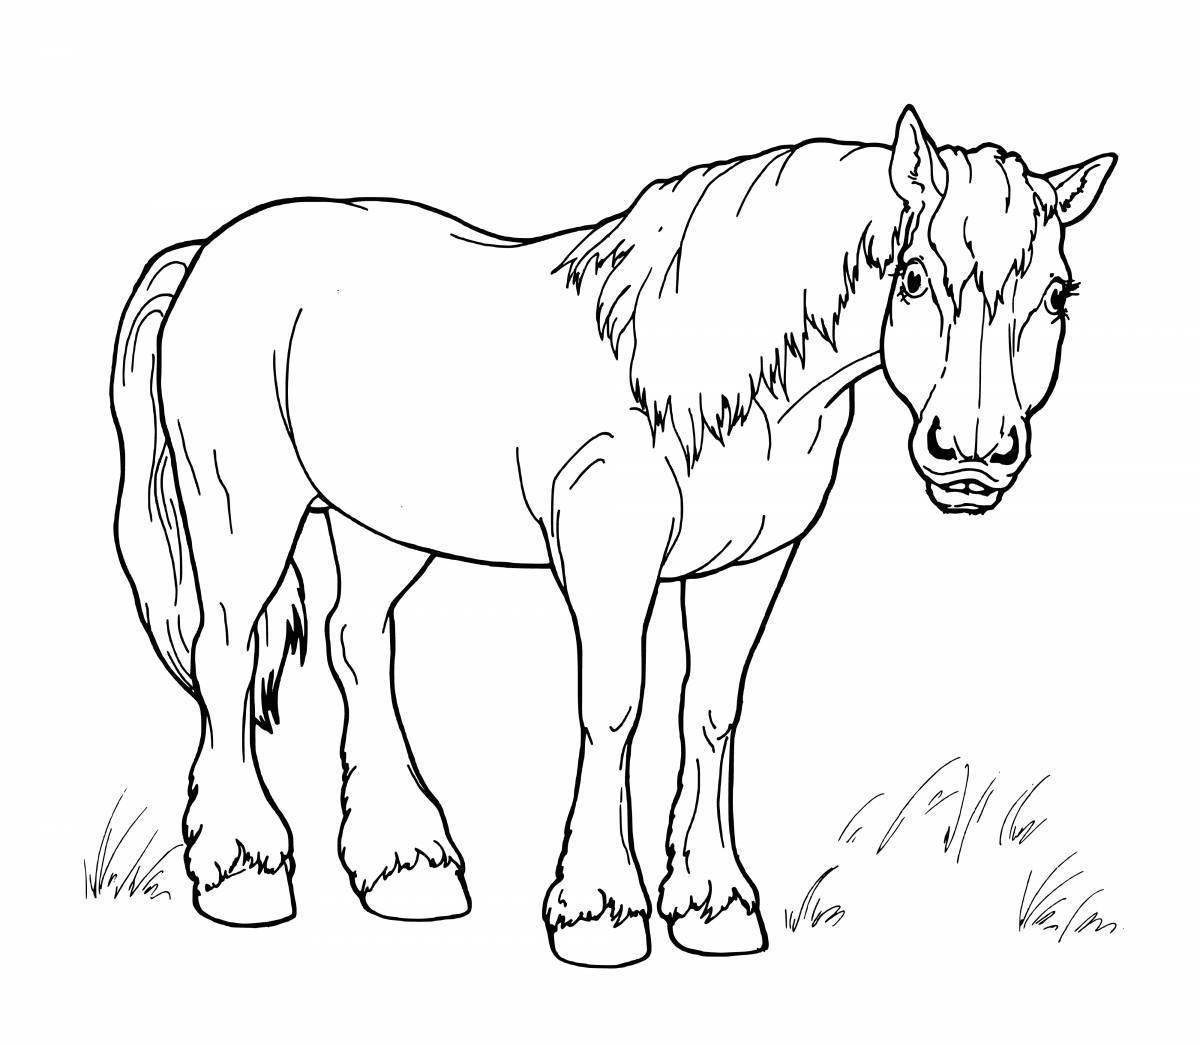 Colorful animal coloring page for kids